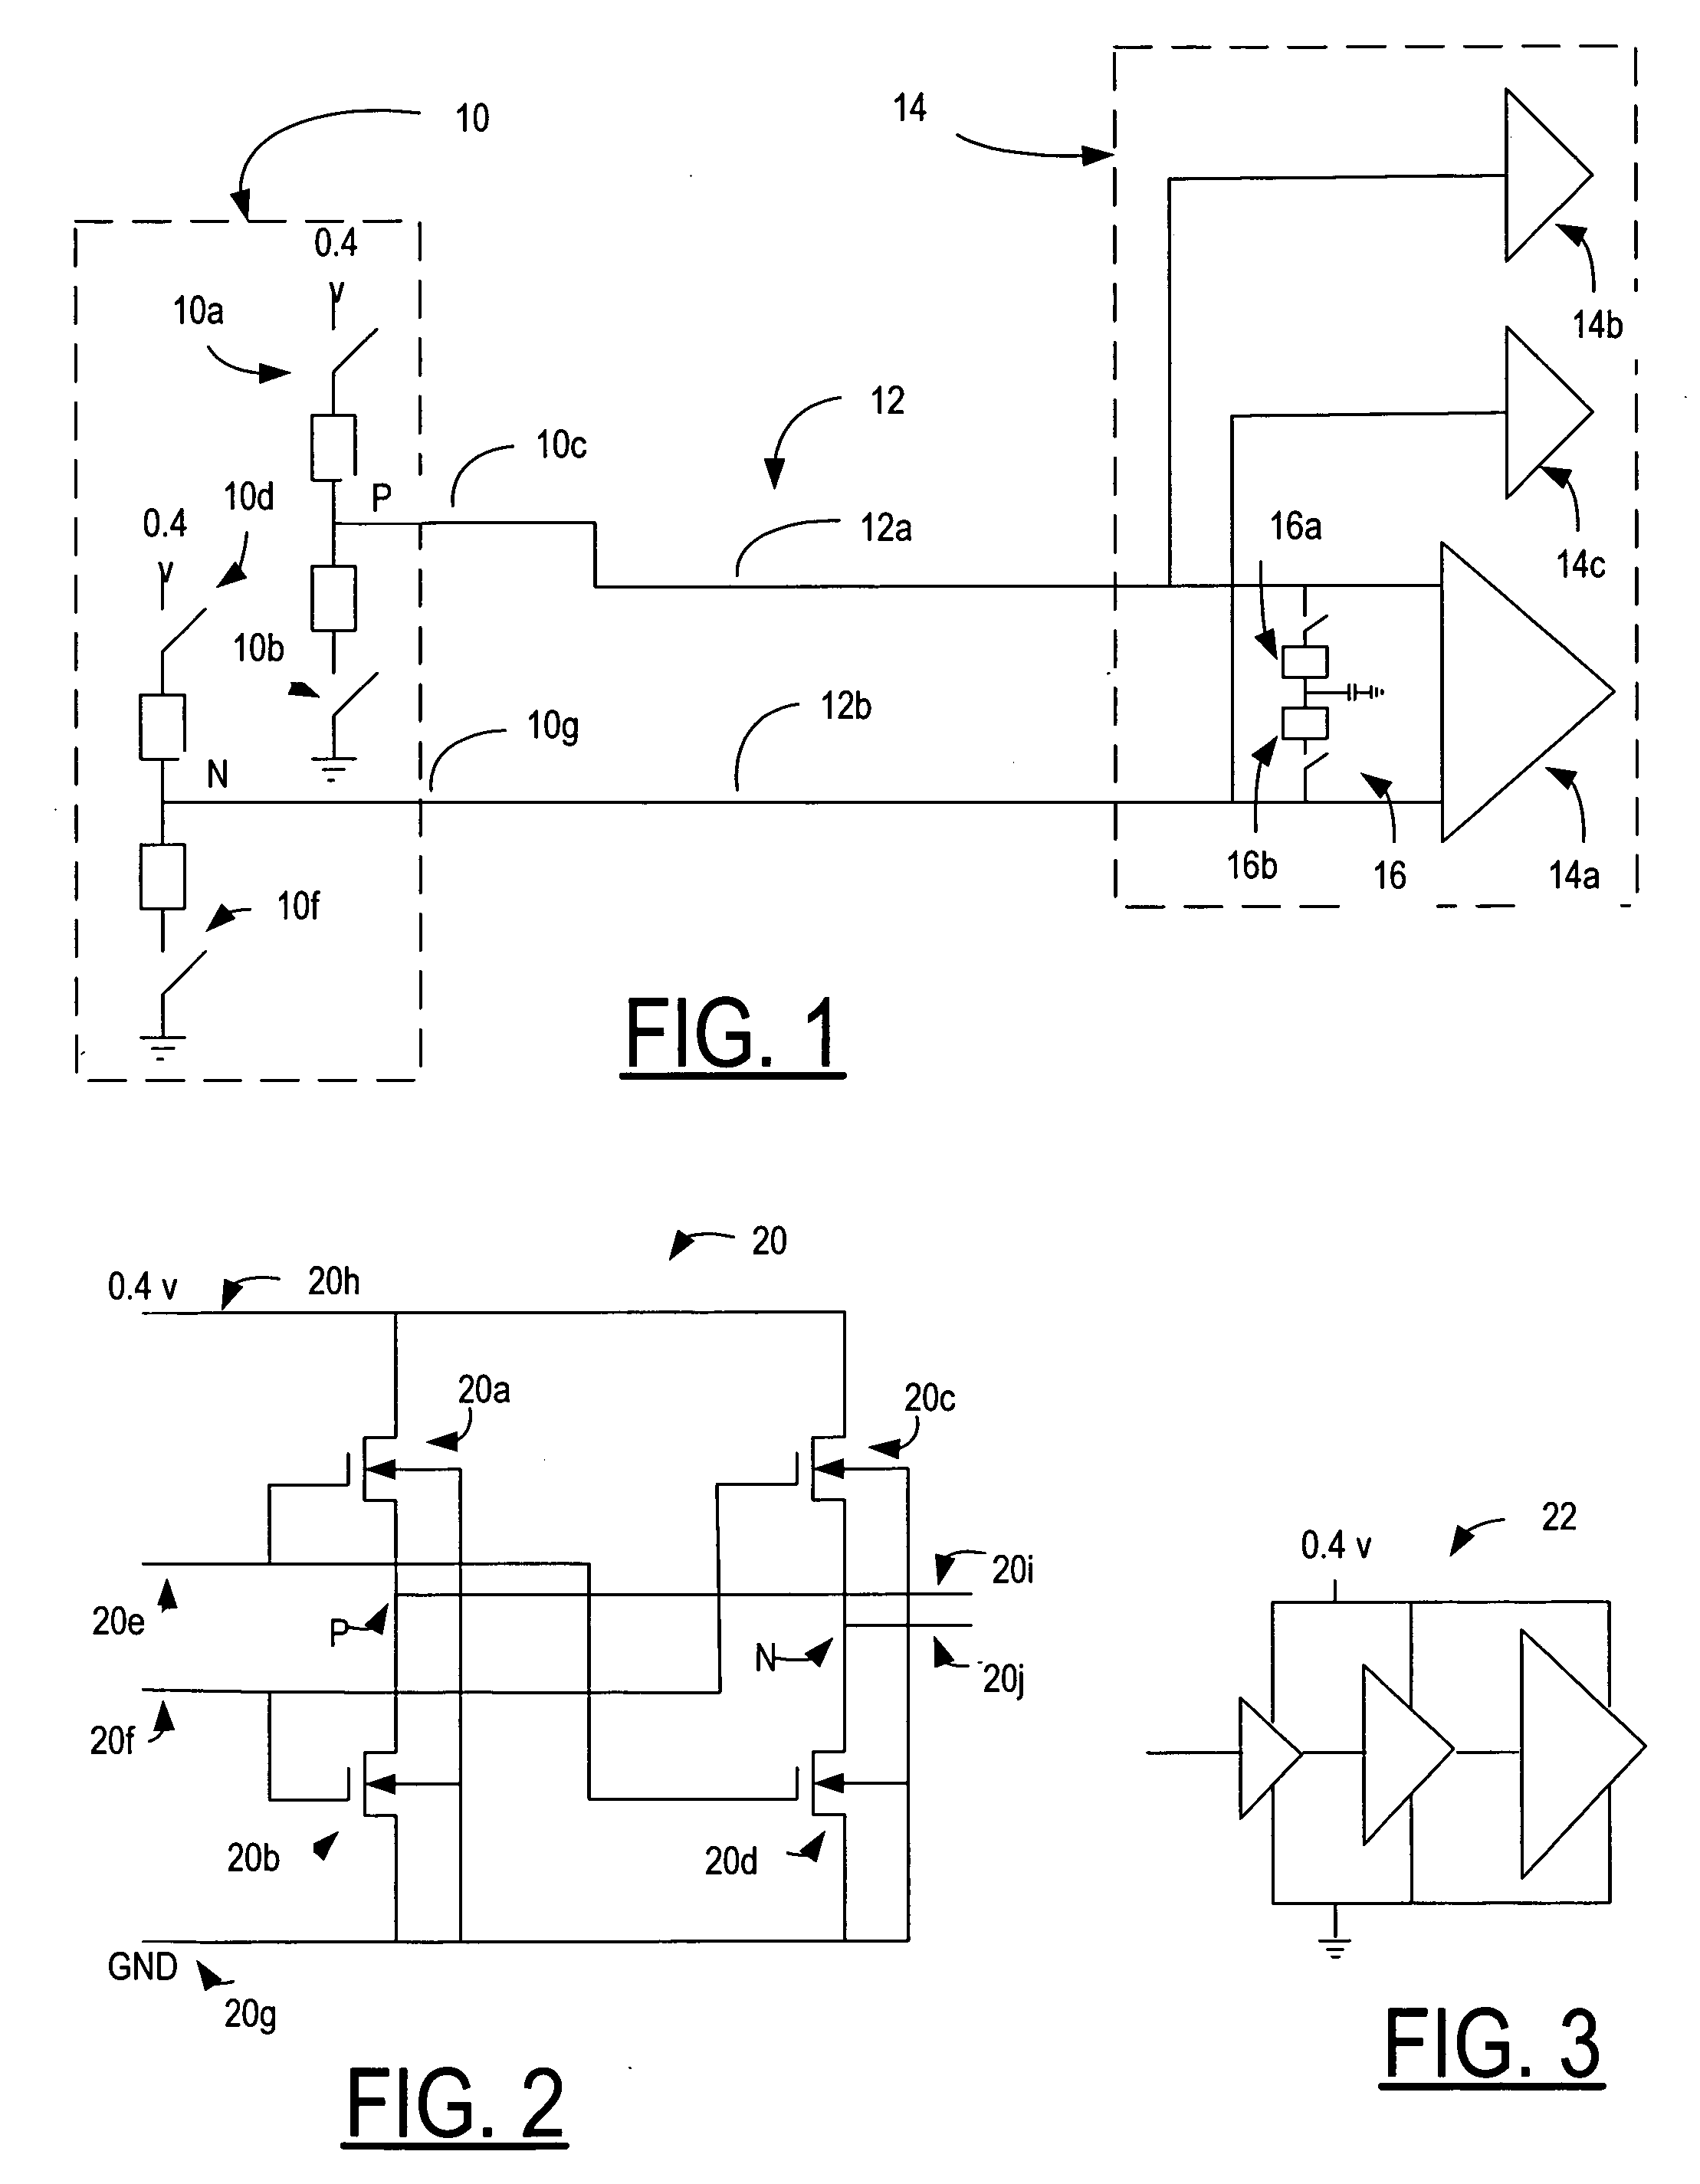 Control and slow data transmission method for serial interface